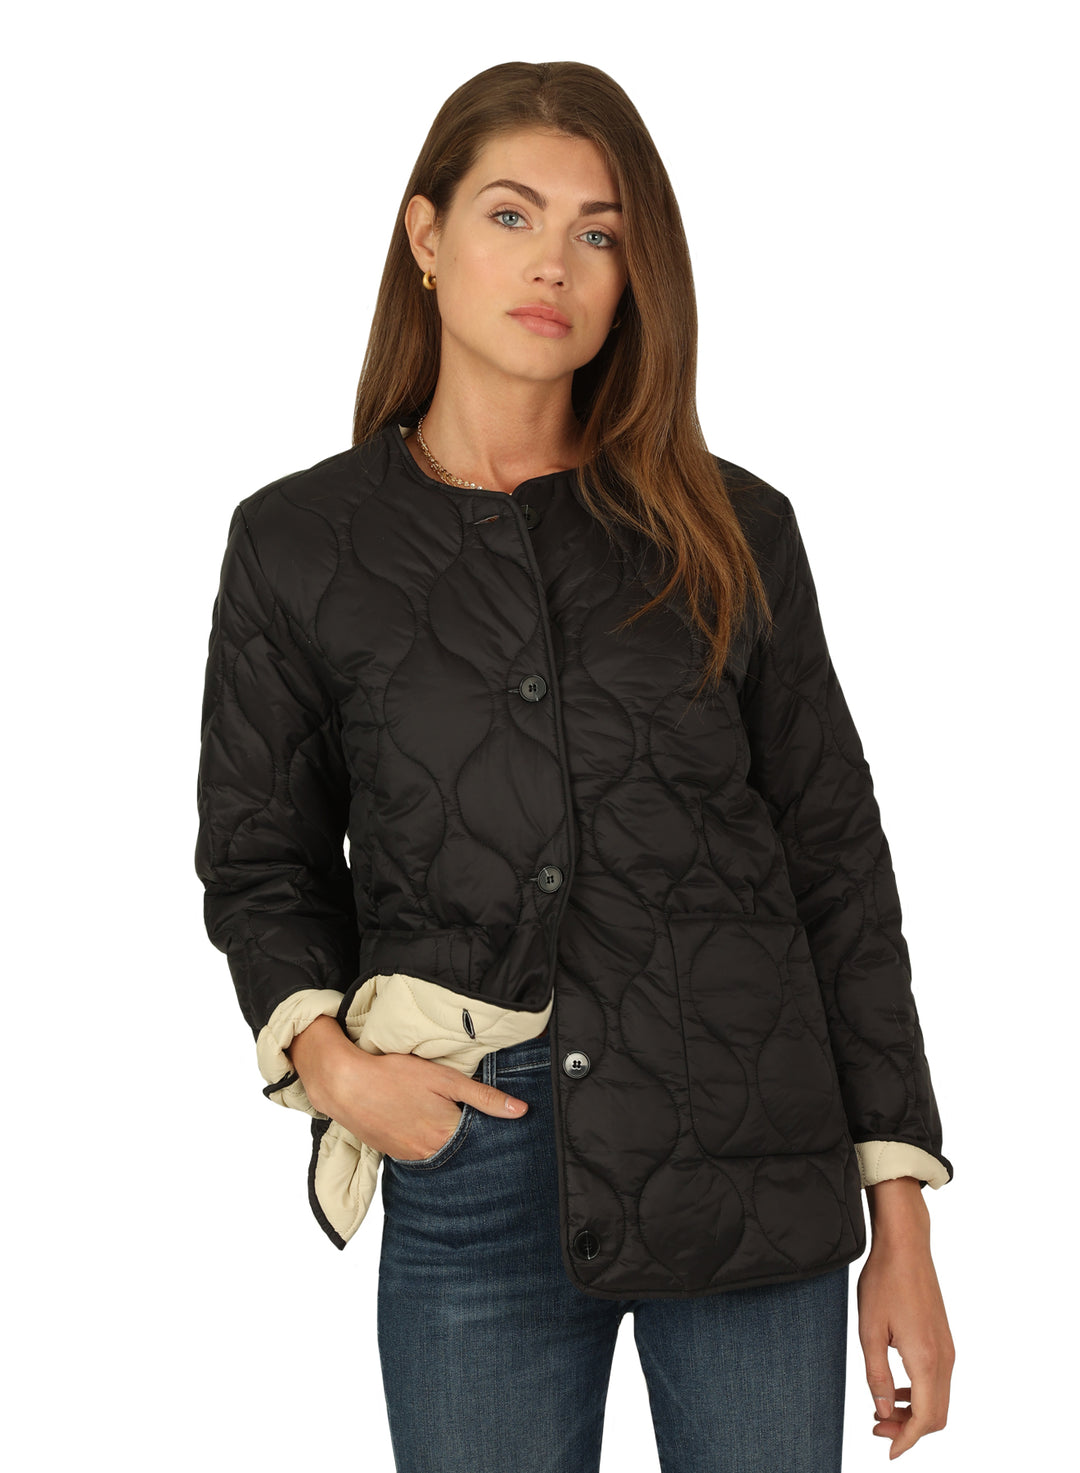 COLLARLESS QUILTED JACKET - BLACK/WHITE - Kingfisher Road - Online Boutique